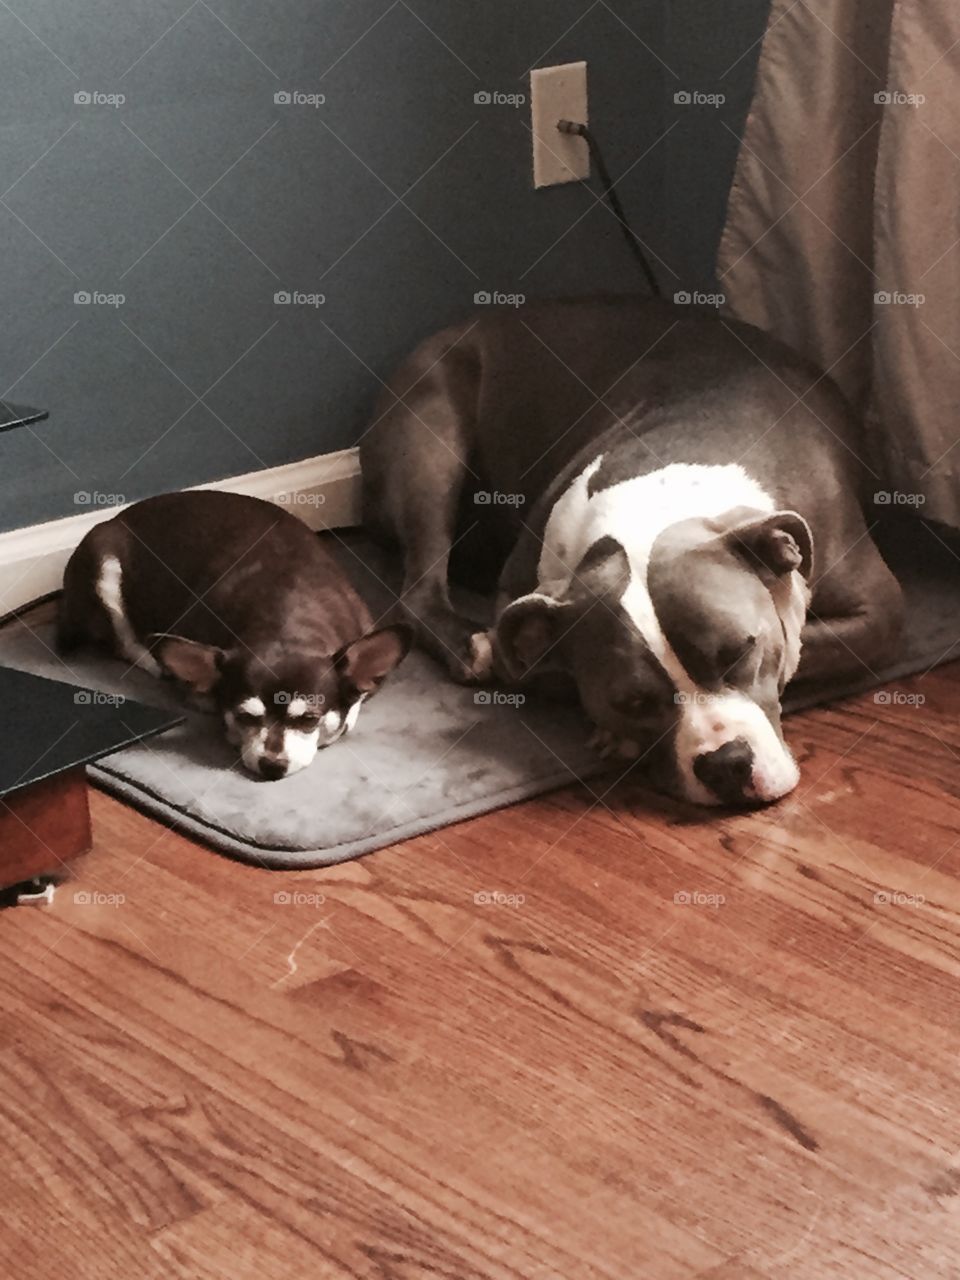 Siblings. Dogs finding comfort with each other